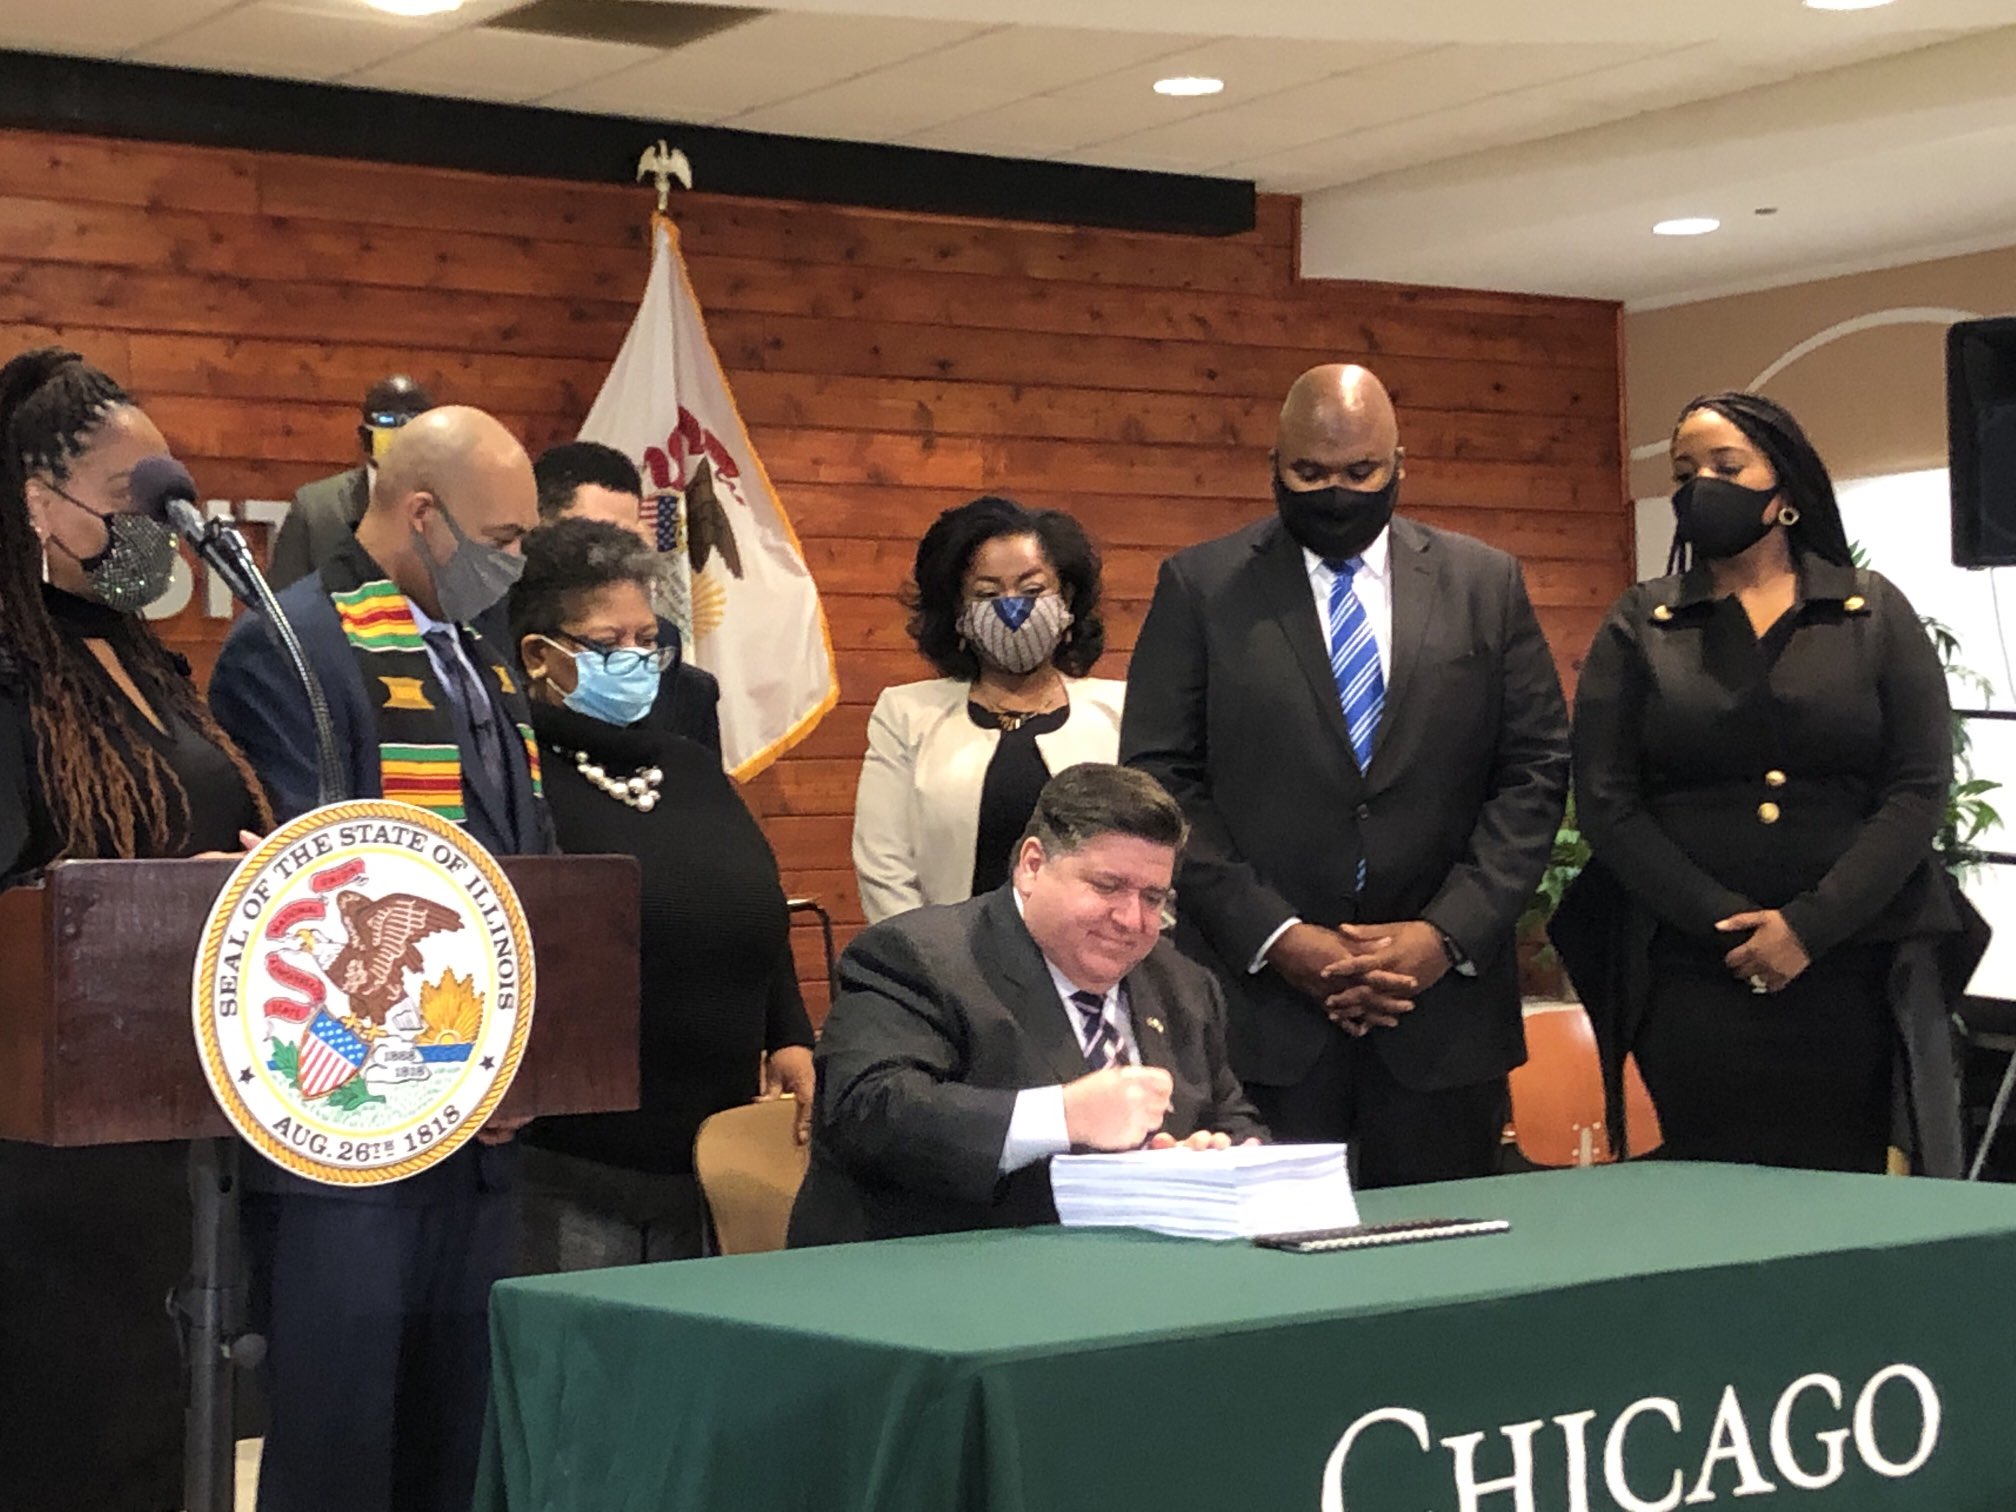 Gov. JB Pritzker signs criminal justice reform package sitting at a green table surrounded by lawmakers in suits and face masks..